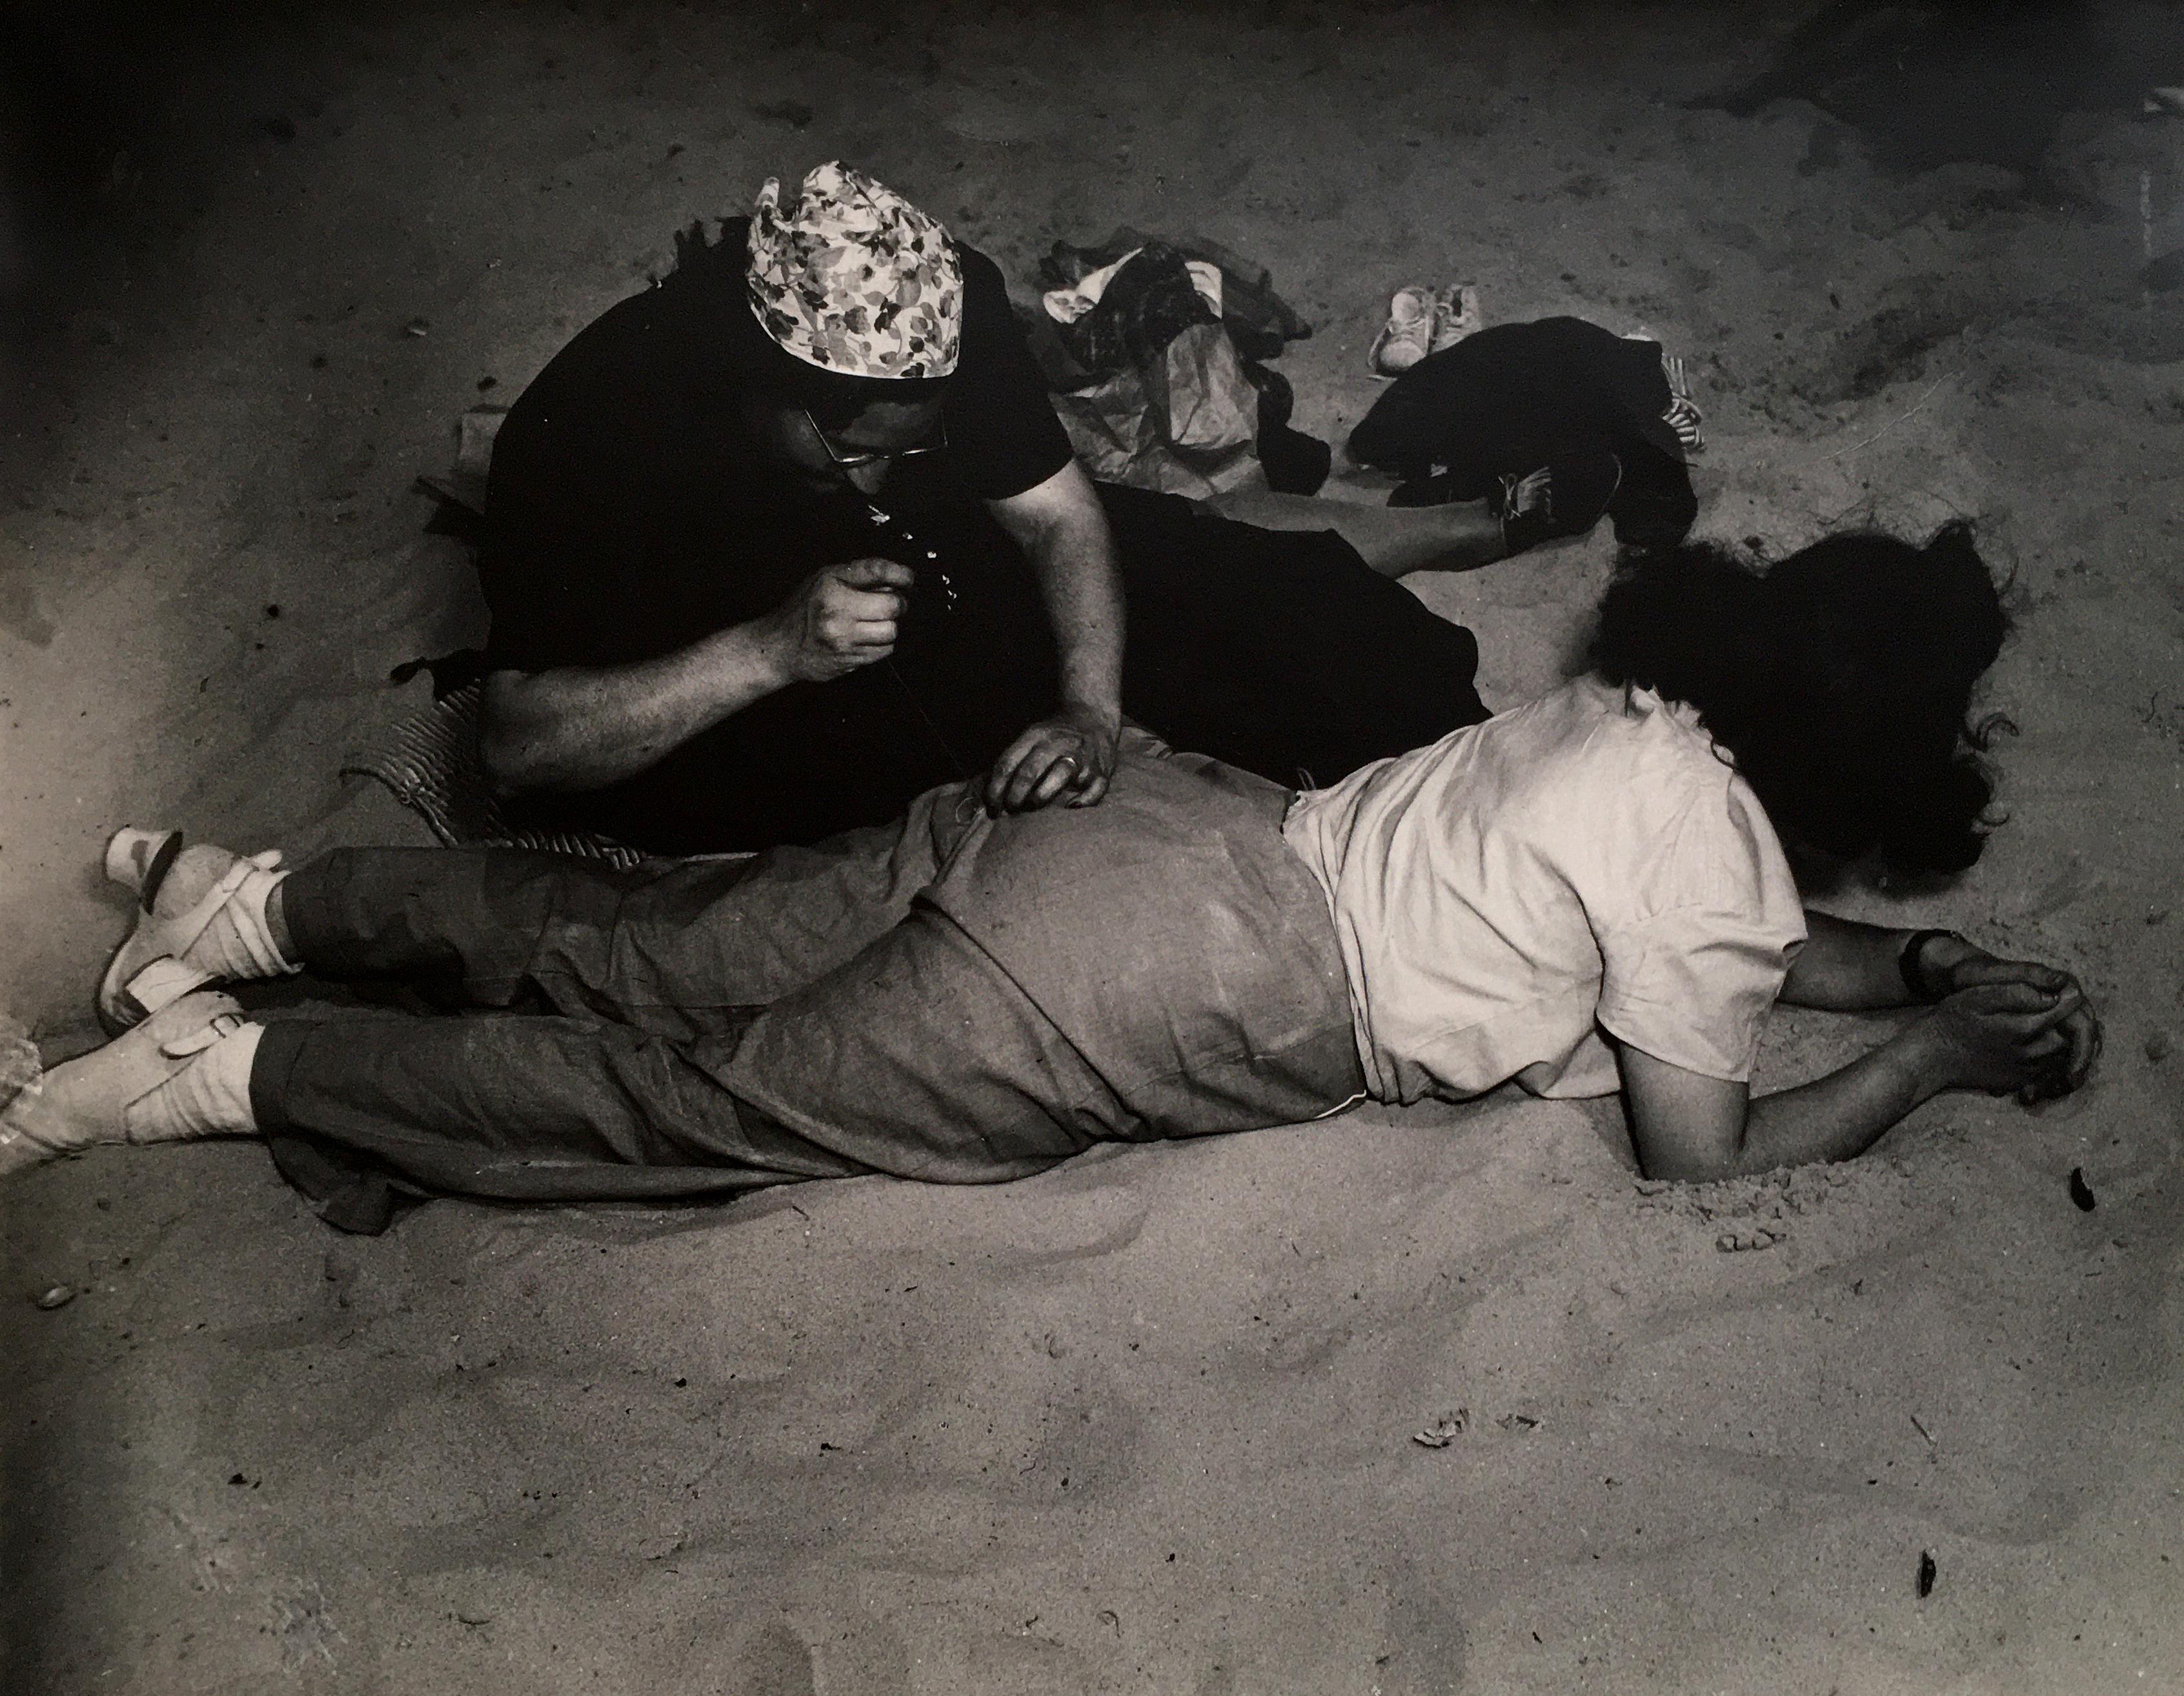 Weegee Portrait Photograph - Woman Sewing at the Beach